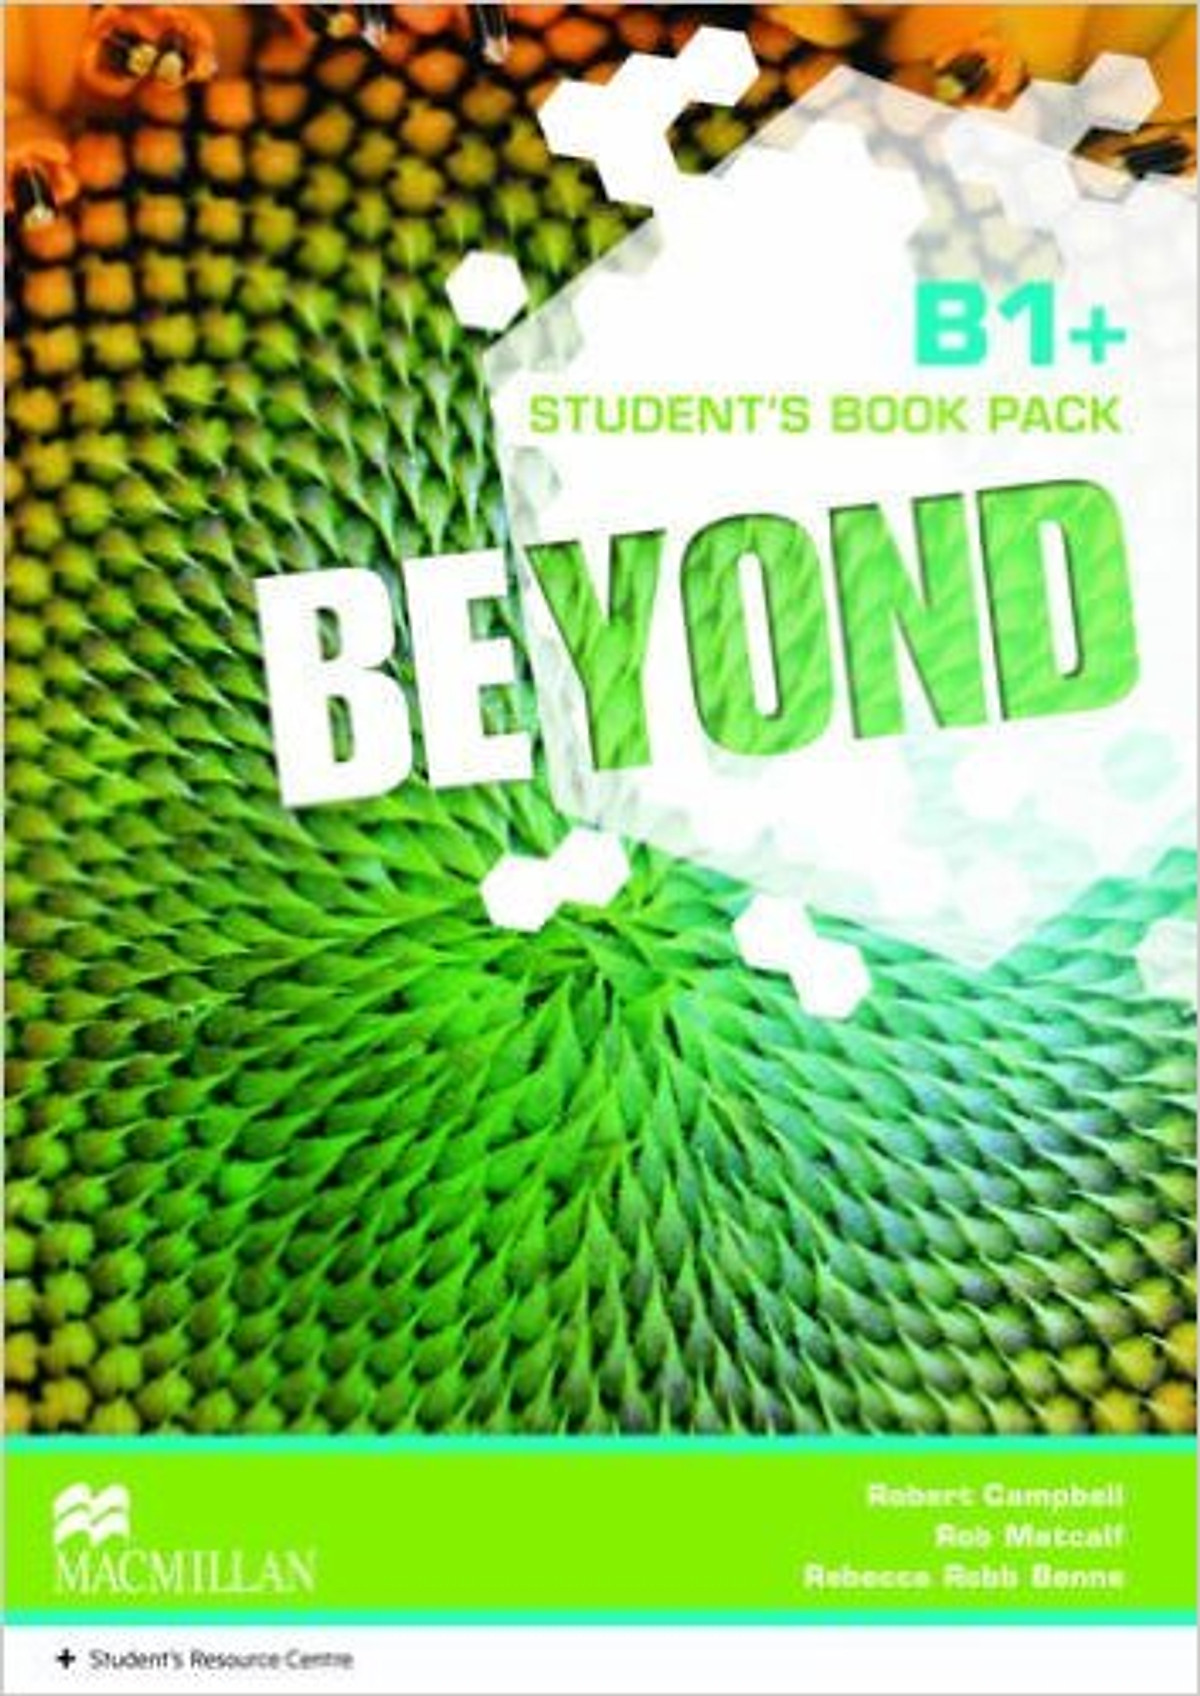 Beyond B1+ Student's Book Pack - Paperback